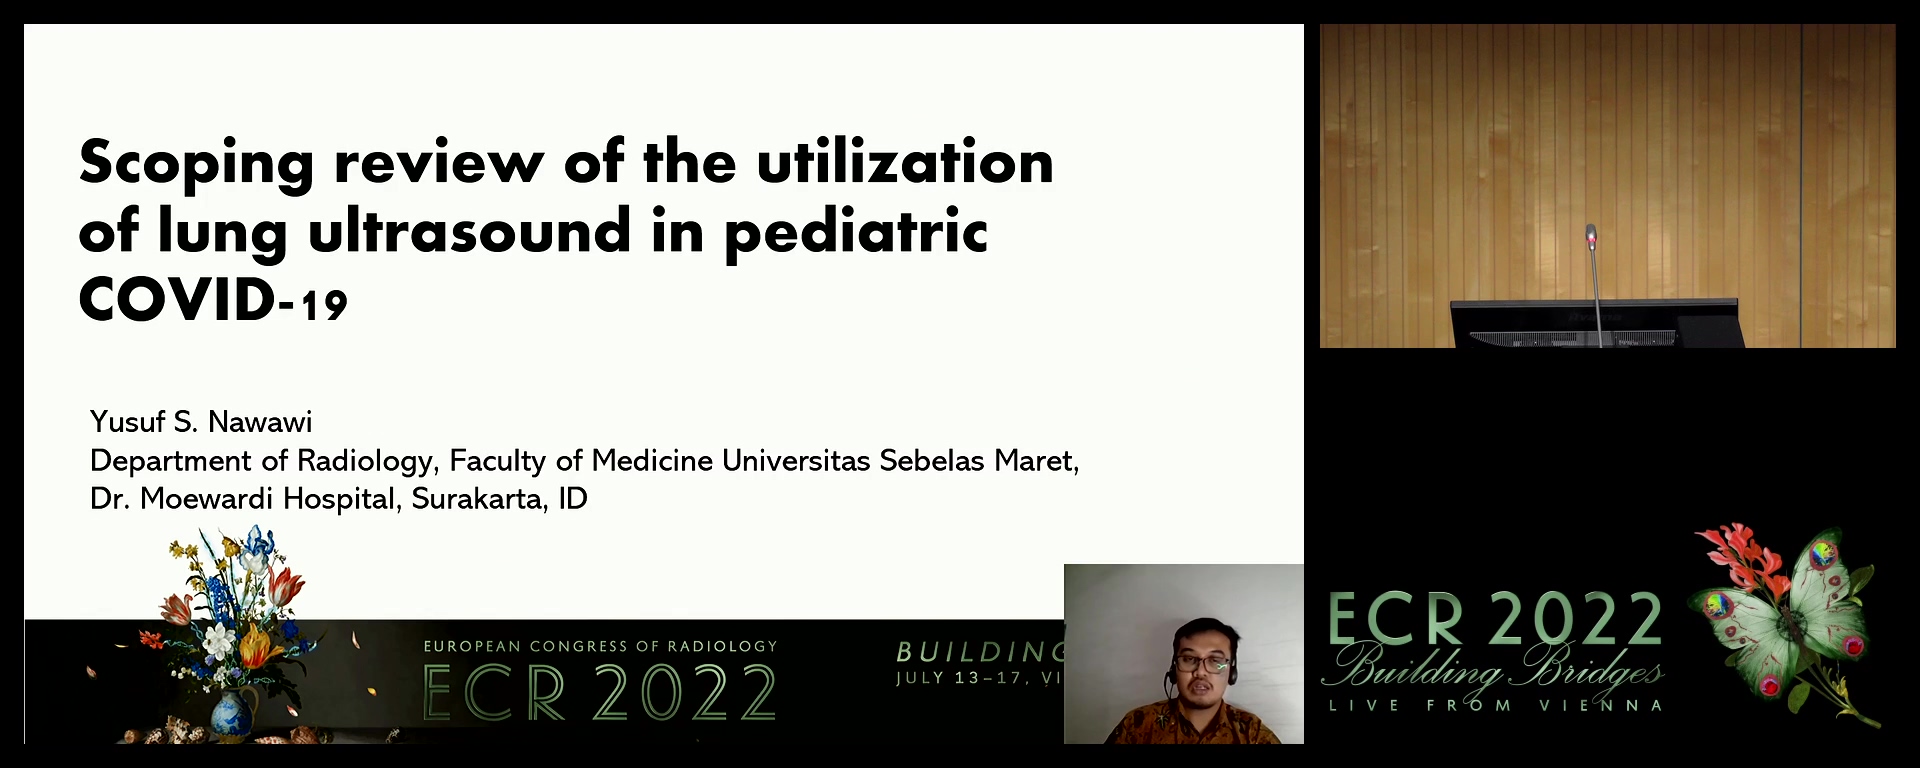 Scoping review of the utilisation of lung ultrasound in paediatric COVID-19 - Yusuf Nawawi, Surakarta / ID